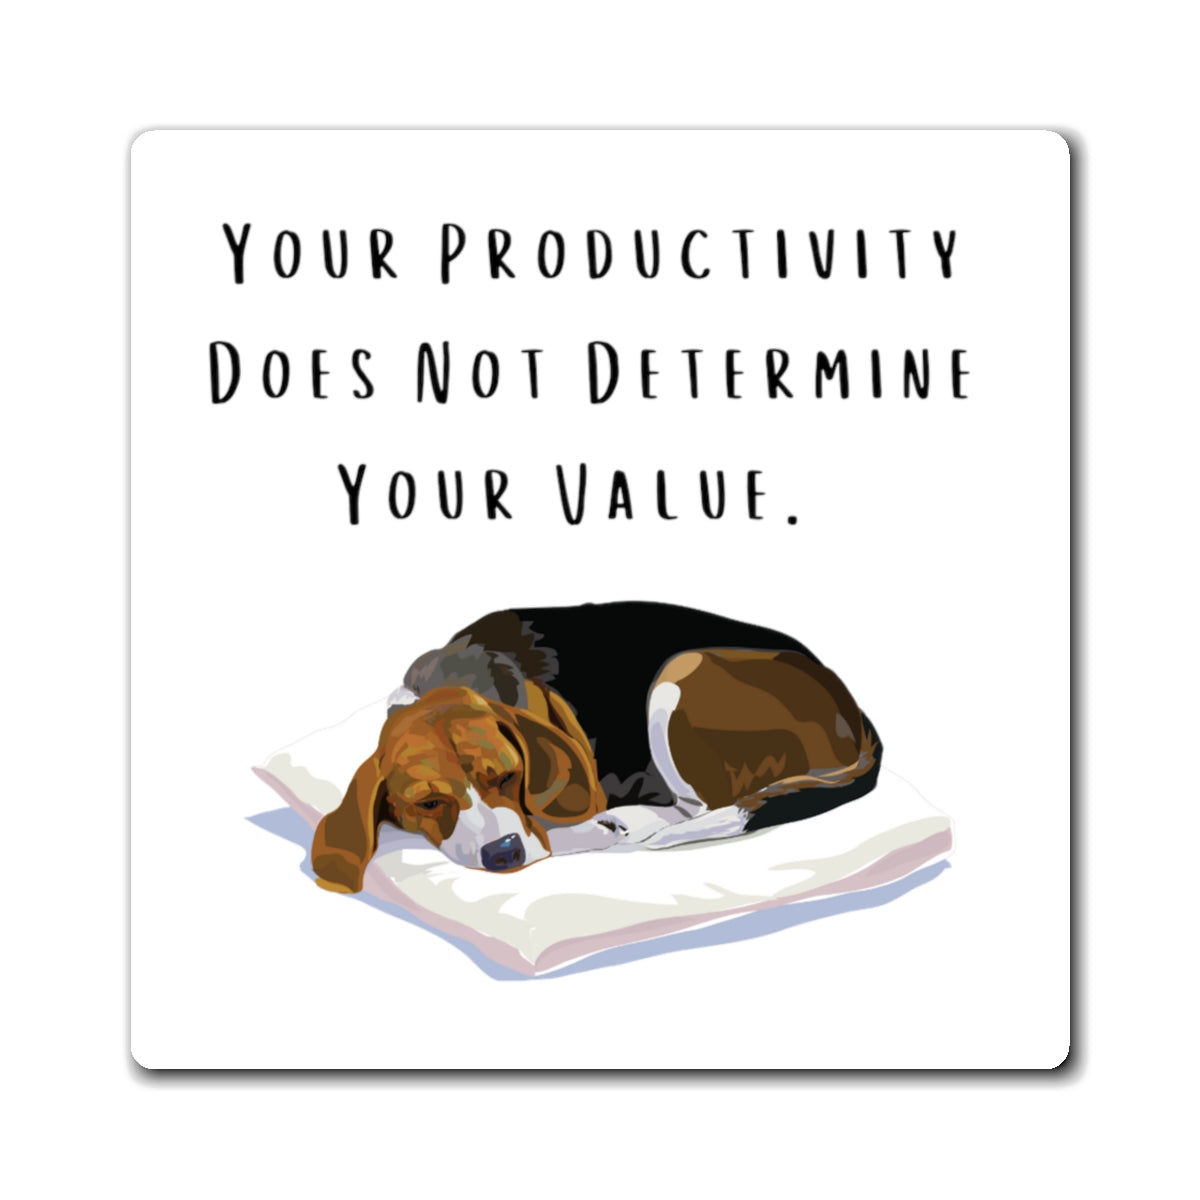 Your Productivity Does Not Determine Your Value, Chronic Illness Magnet, Encouragement Magnet, Dog Magnet, Retro Deer Magnet, Inspirational - The Good Life Vibe